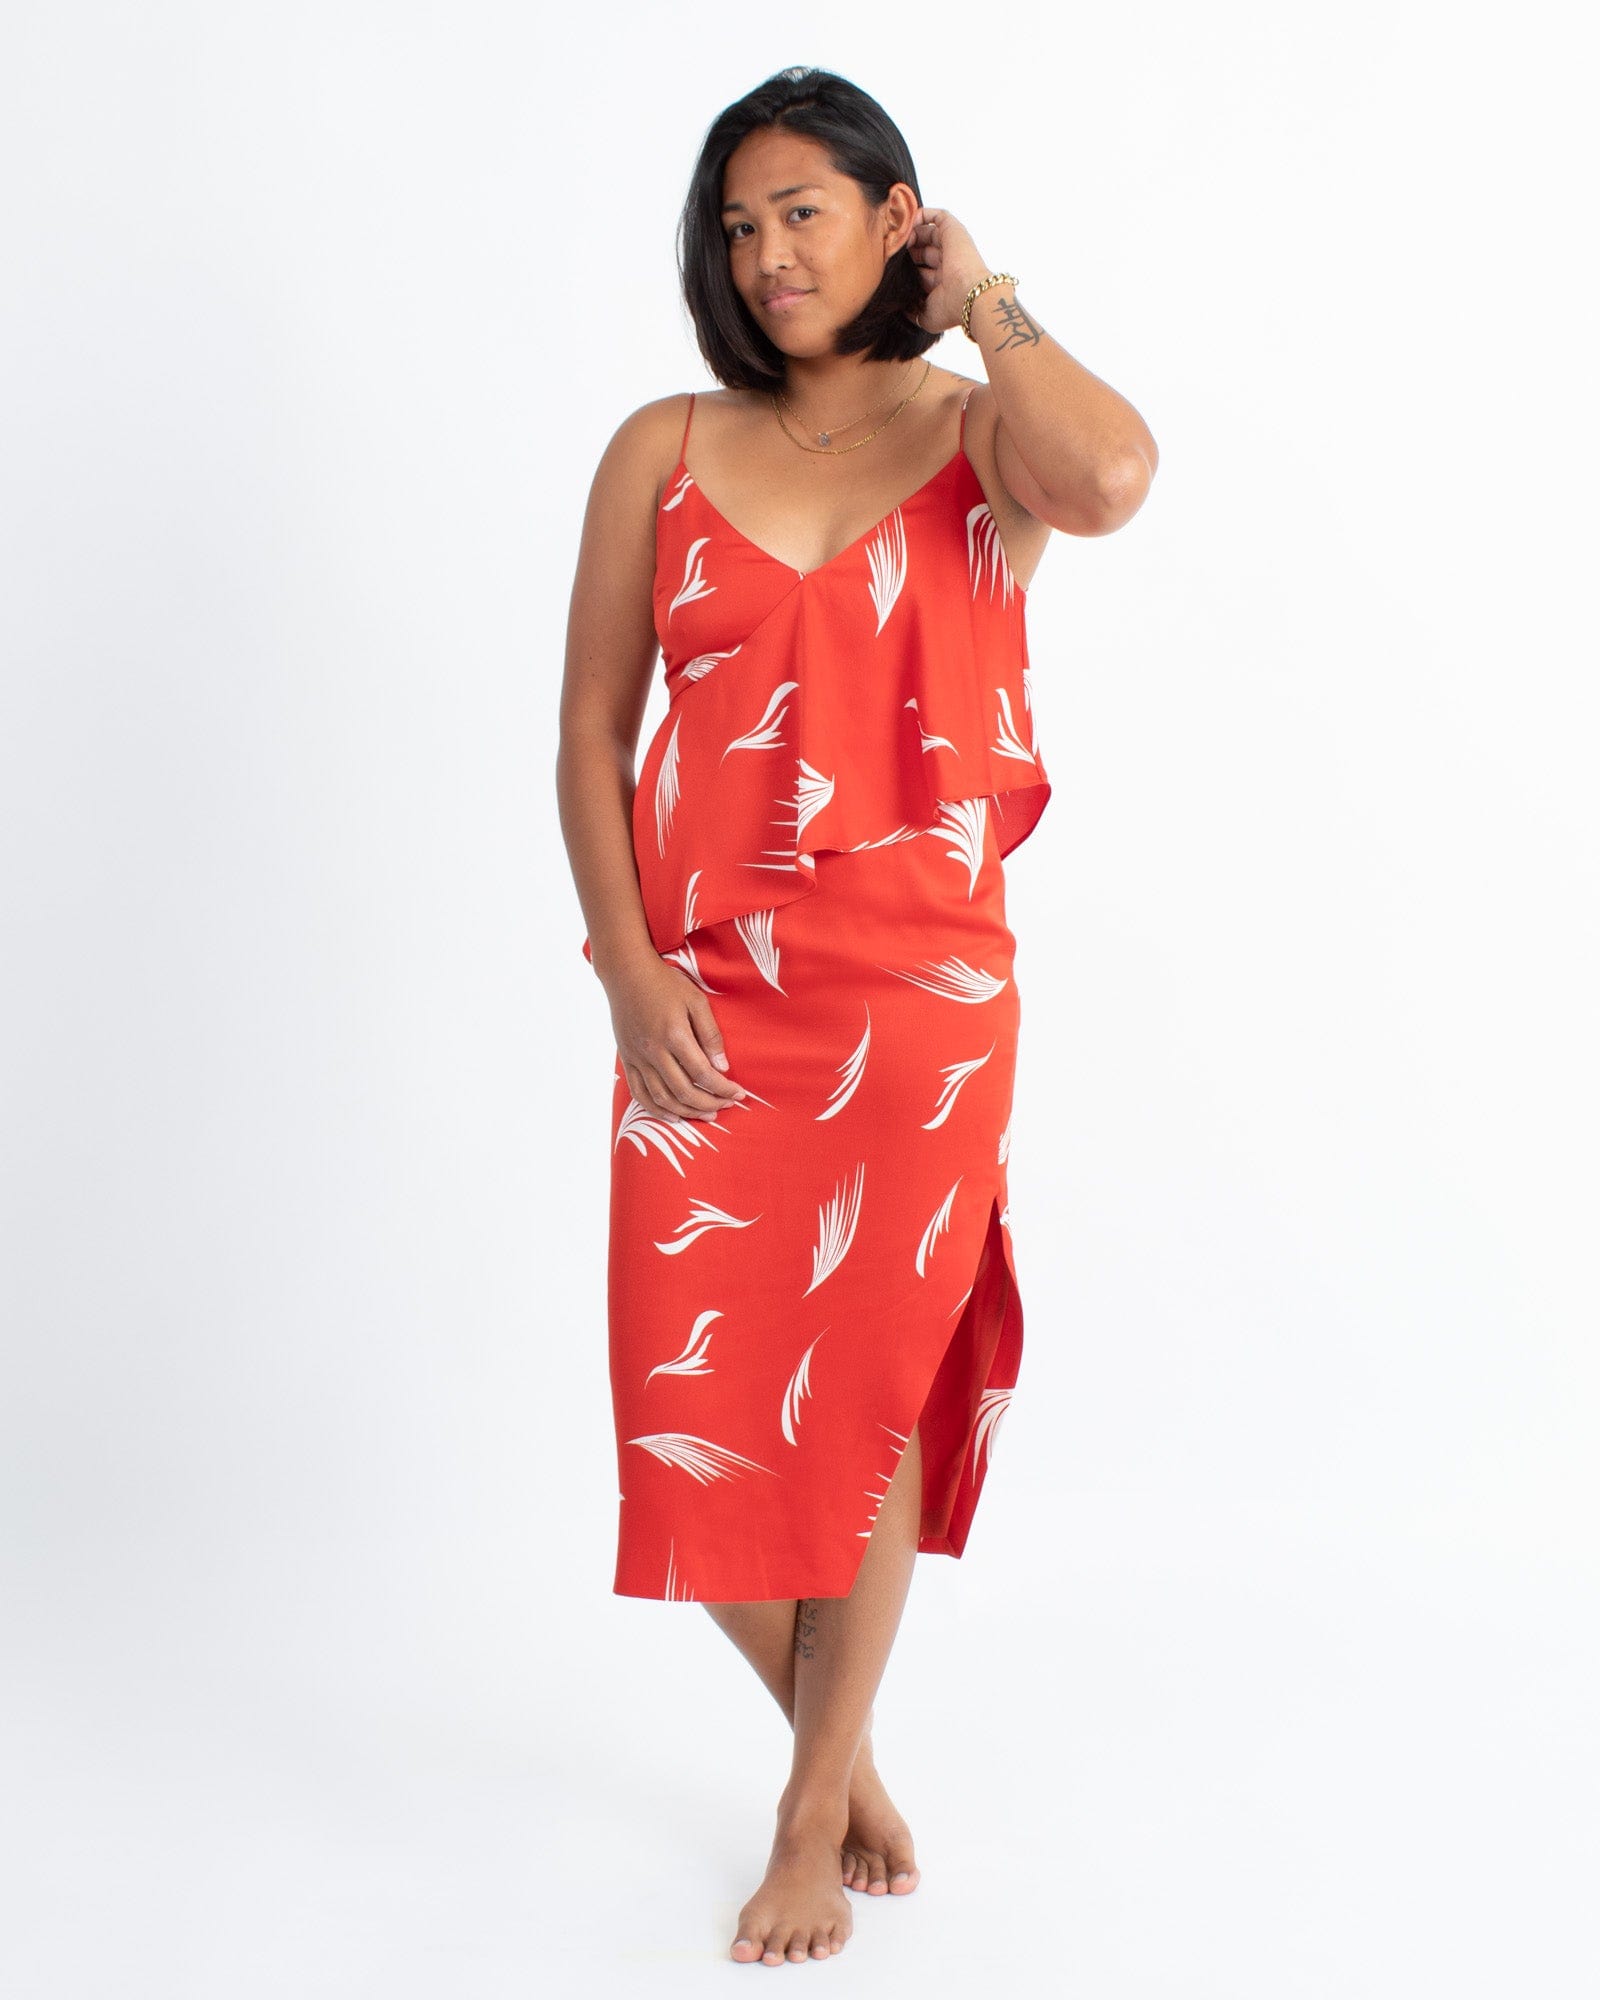 Printed Red Dress The